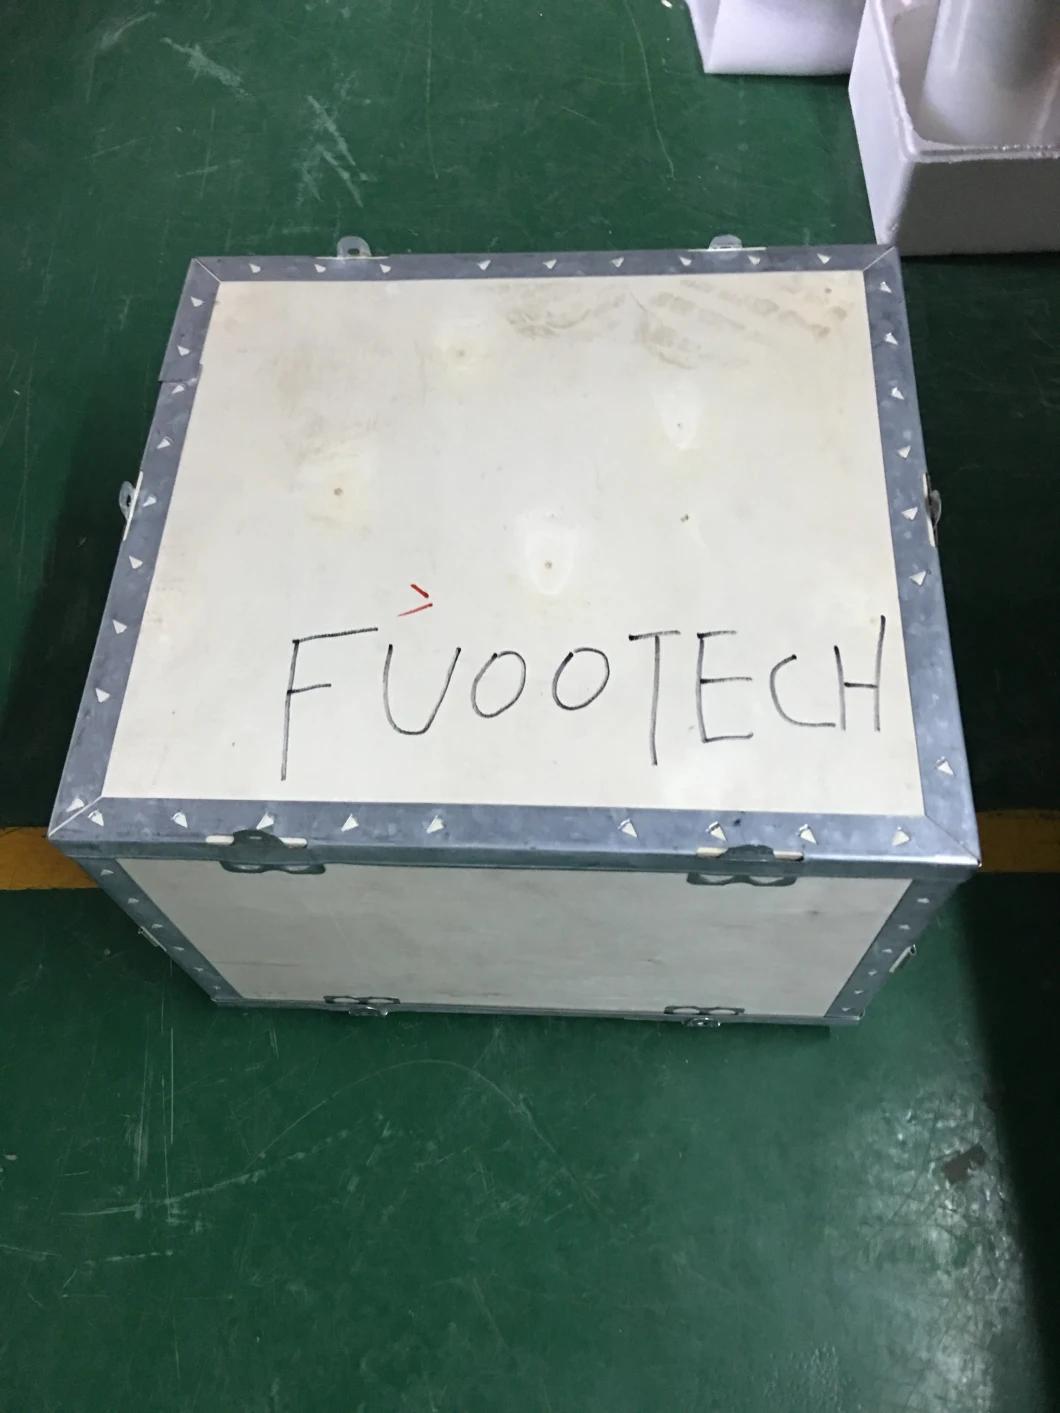 Fuootech Fully Automatic Karl Fischer Instrument Oil Moisture Content Testing Machine